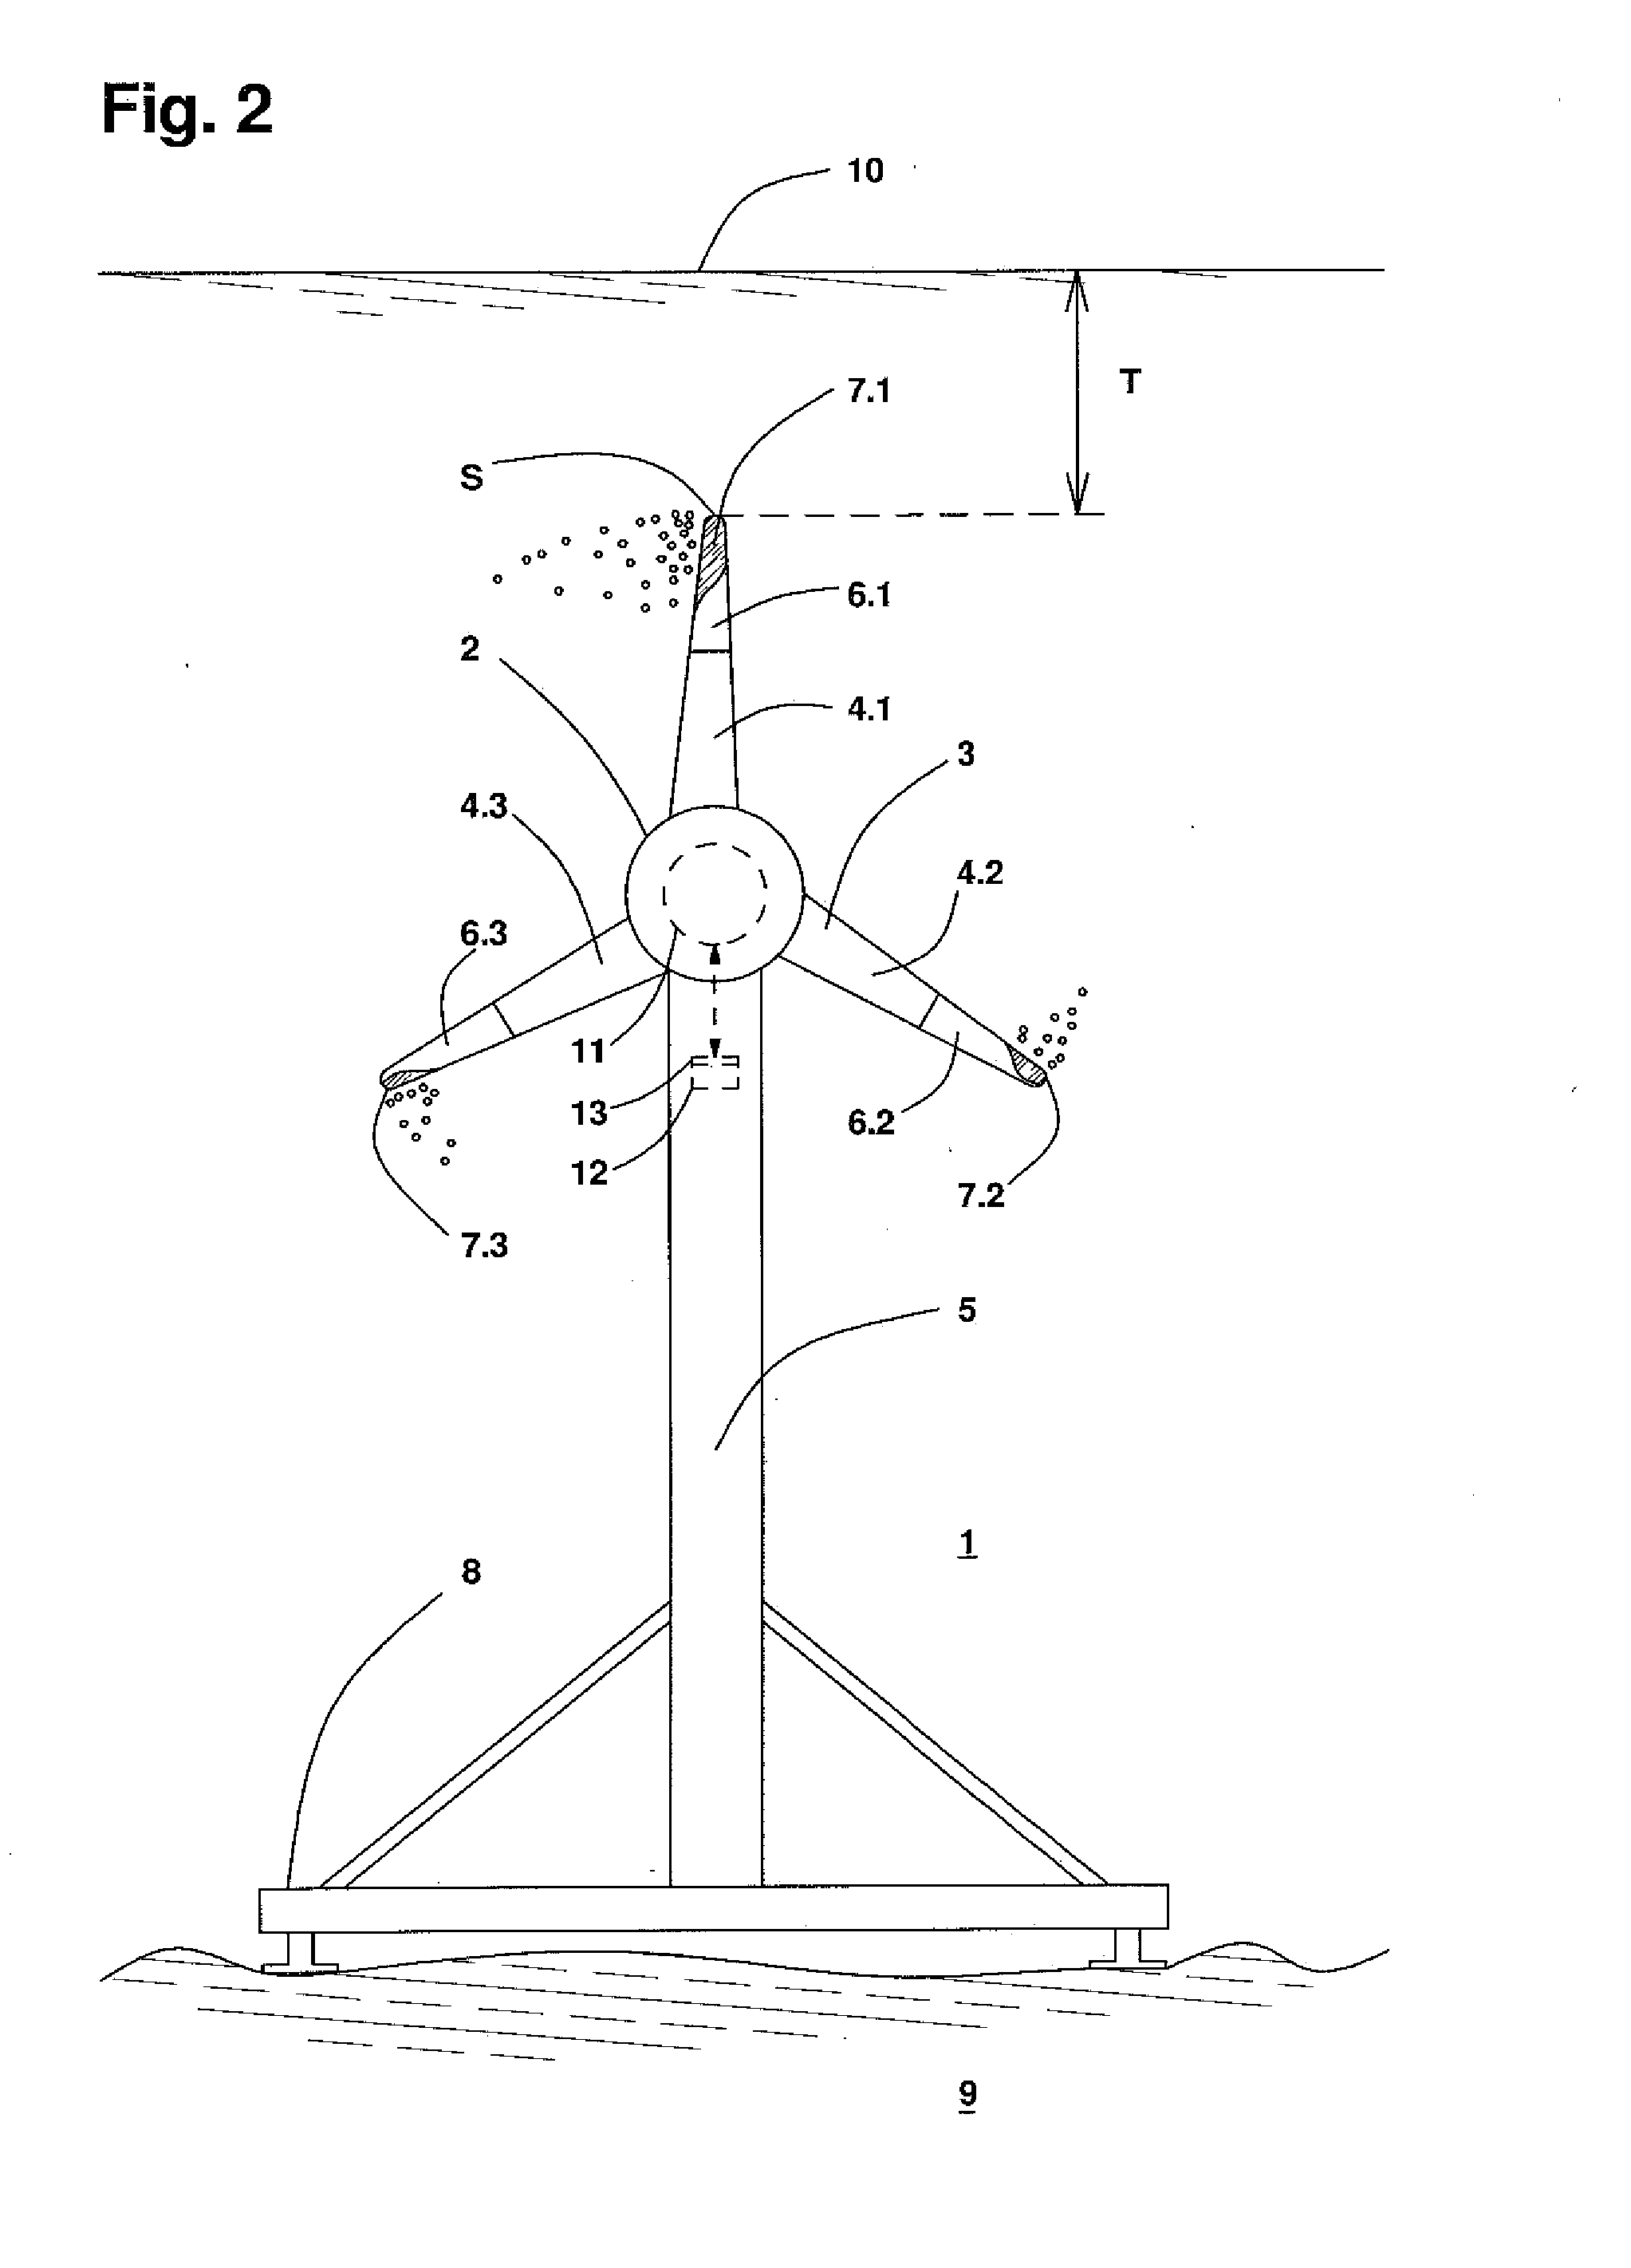 Marine current power plant and a method for its operation